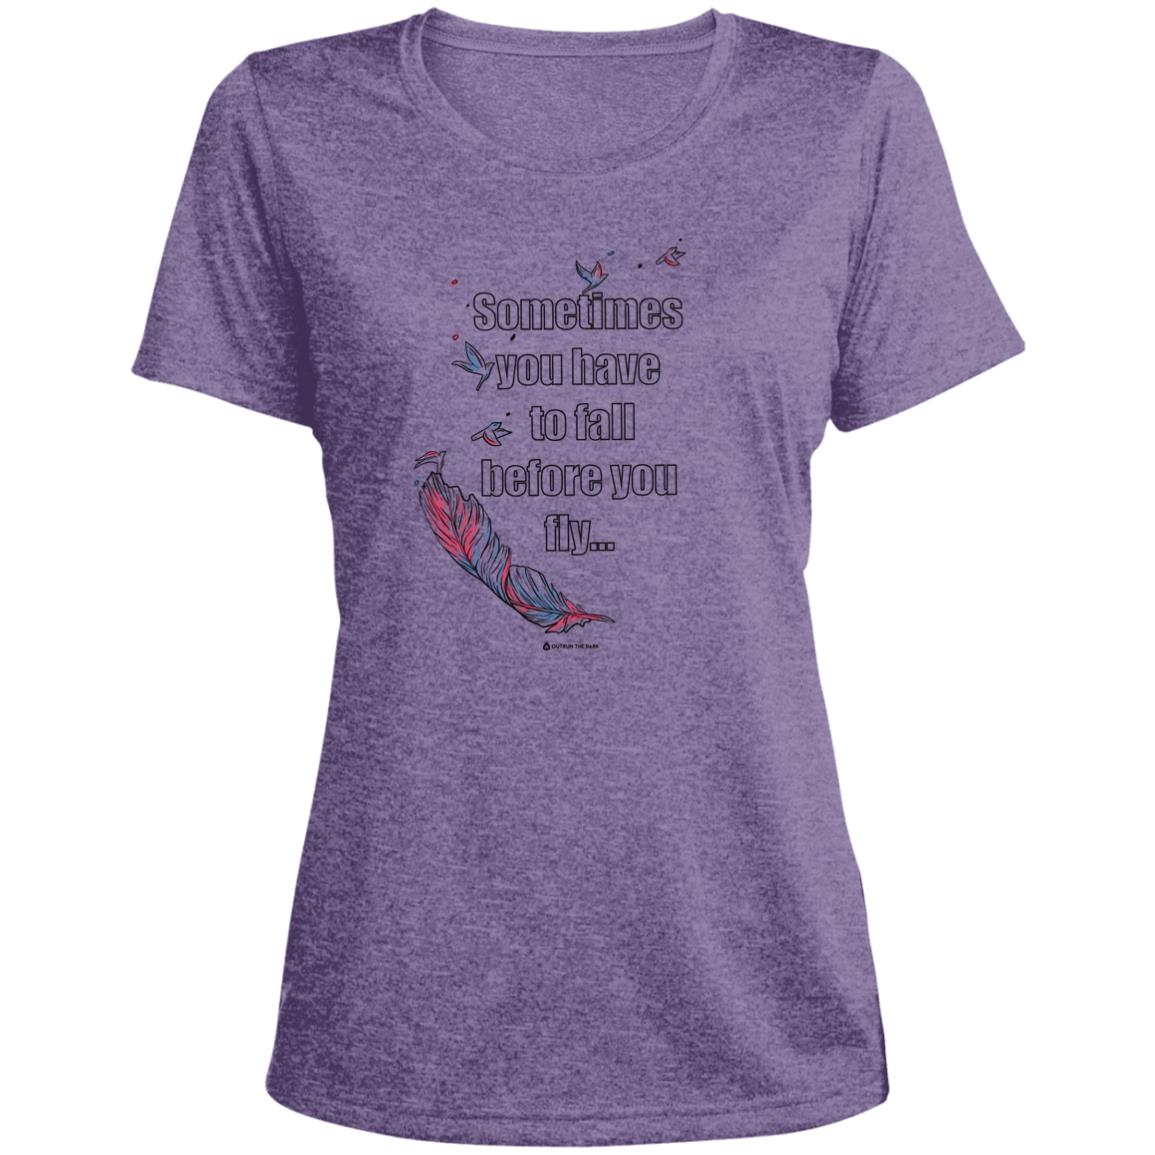 Before you fly Women's Performance Tee